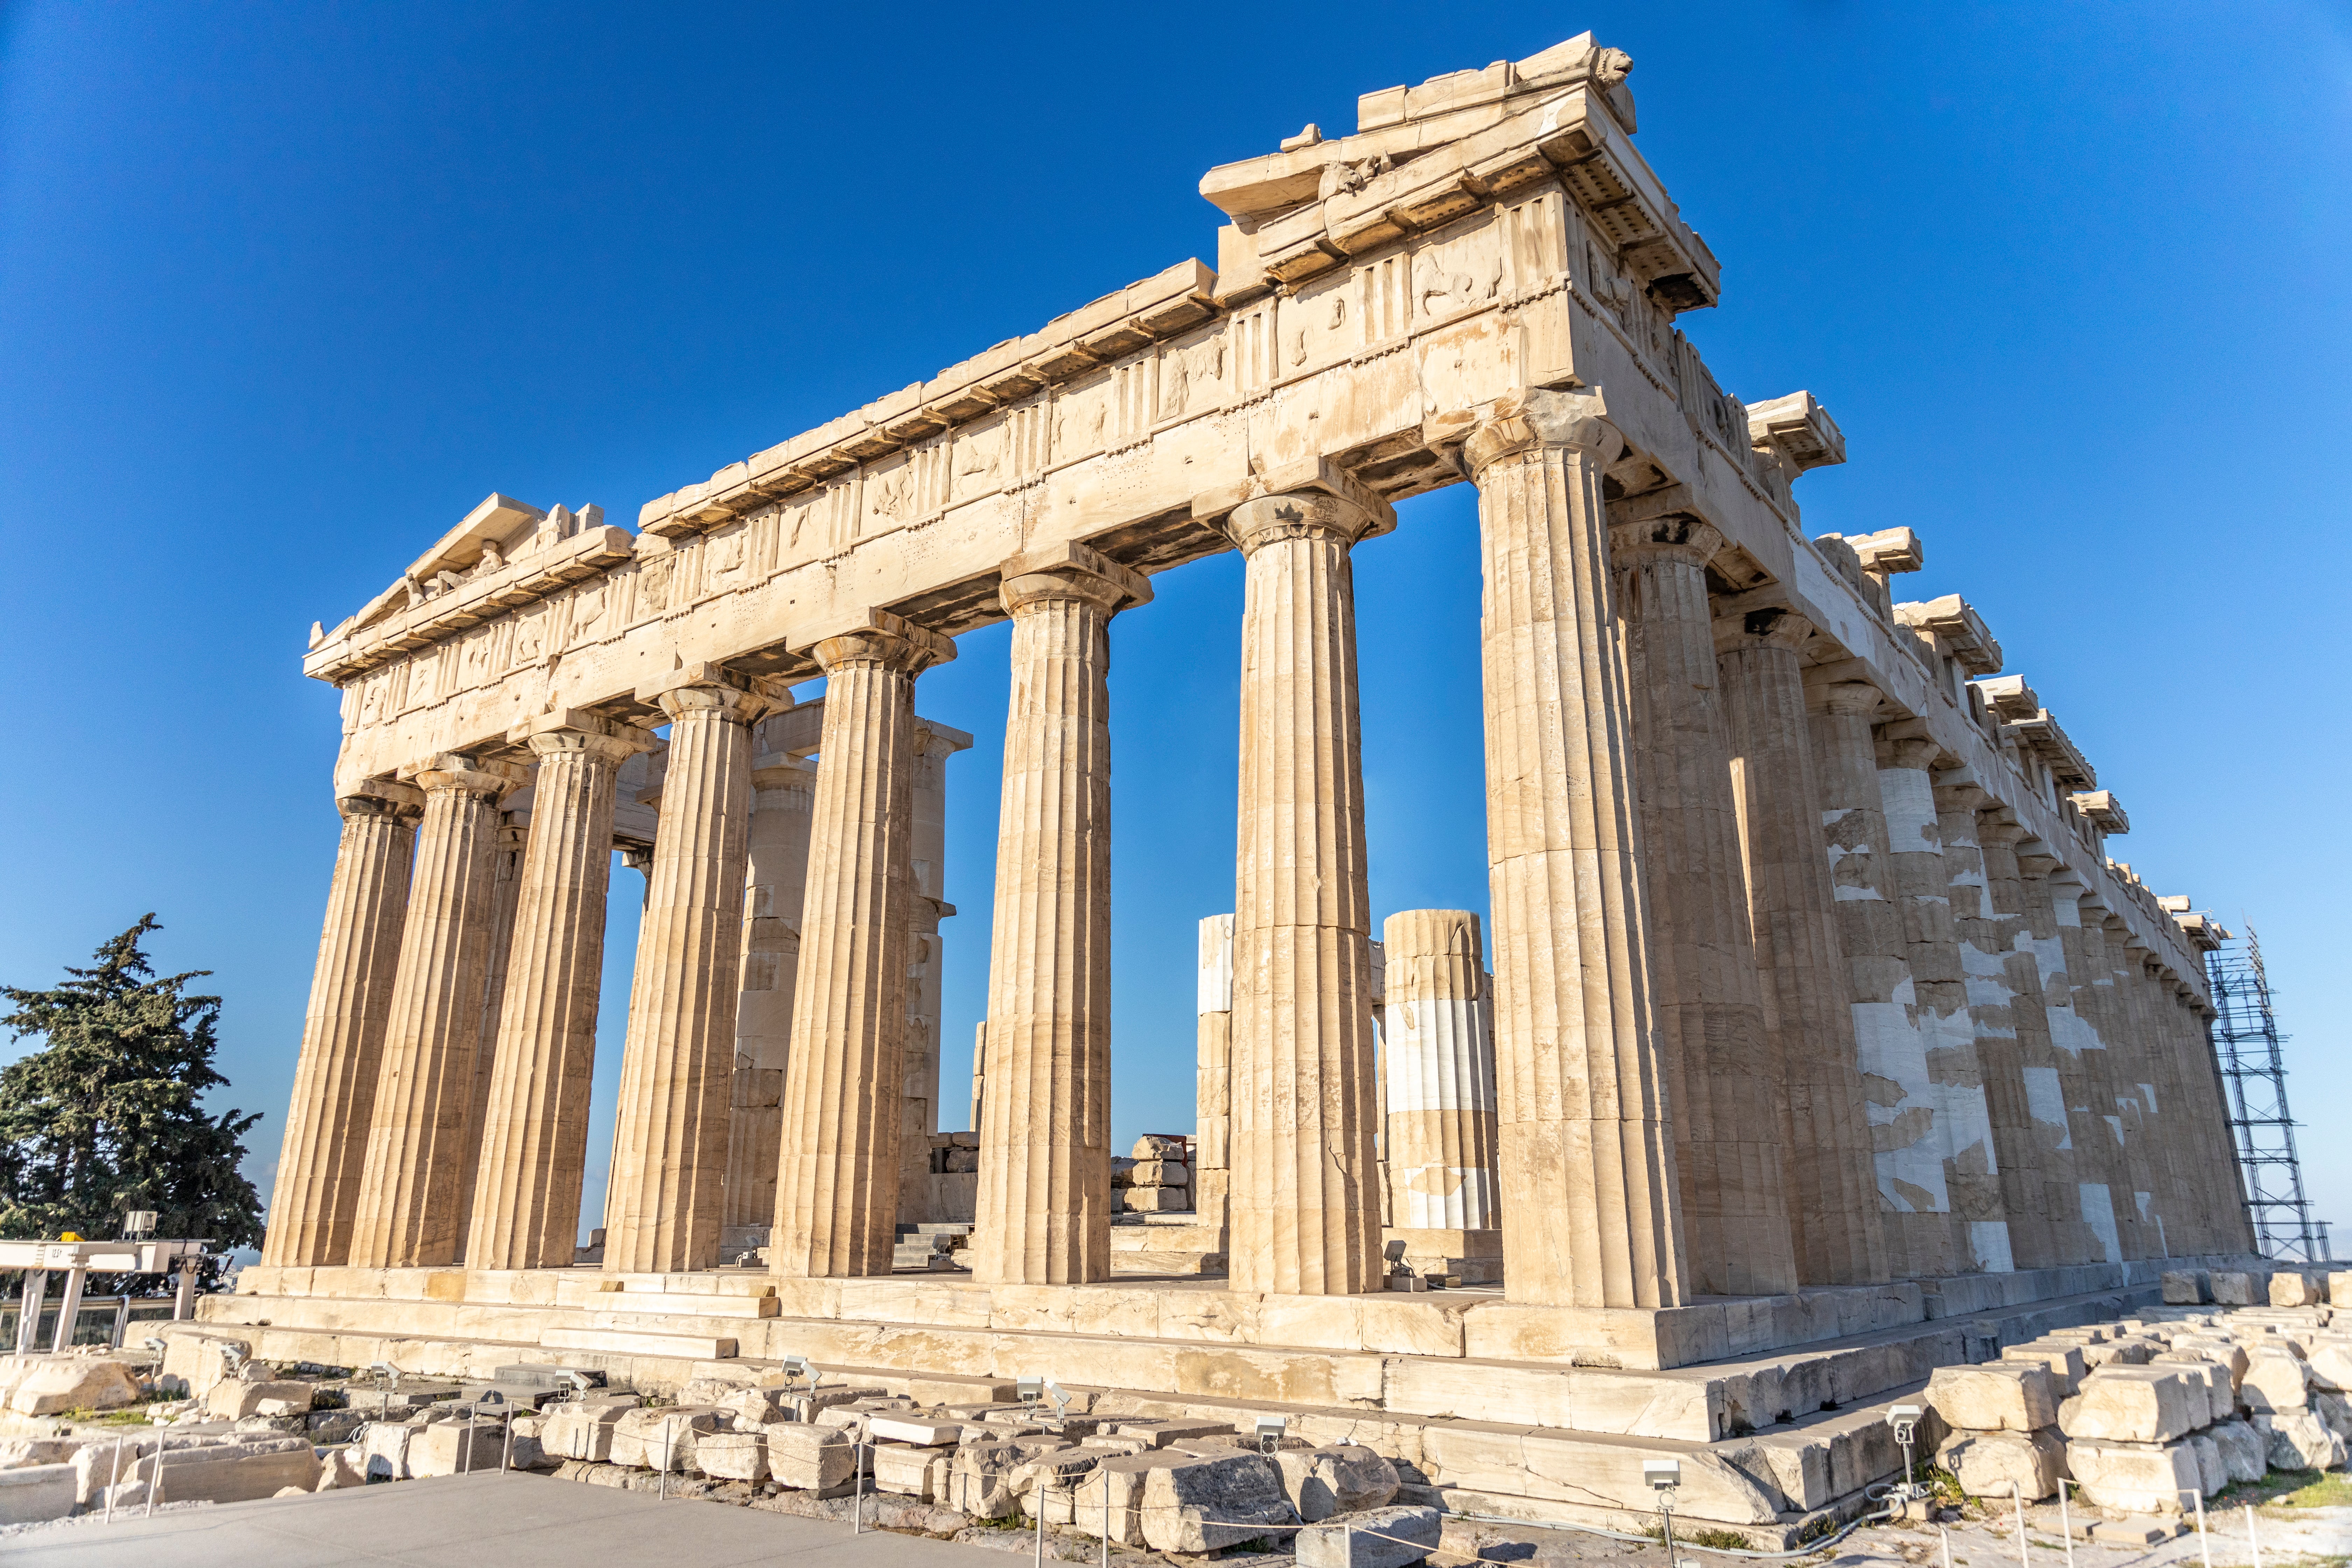 For the perfect dial-up, dial down holiday, Athens ticks both culture and pleasure boxes